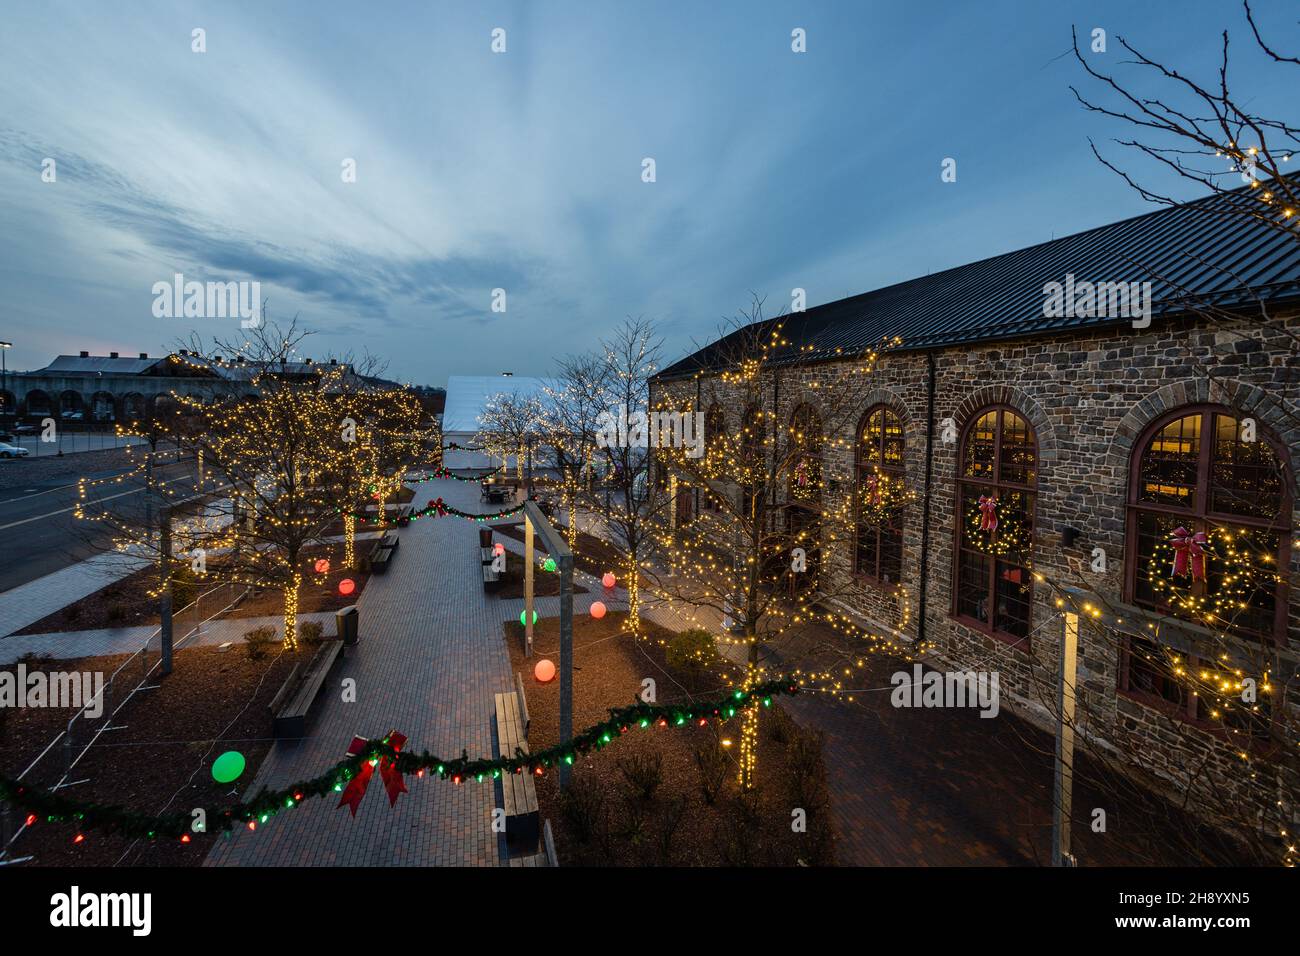 Christkindlmarkt ready to open at dusk in beautiful lights surrounded by the industrial and historic center of Bethlehem Stock Photo